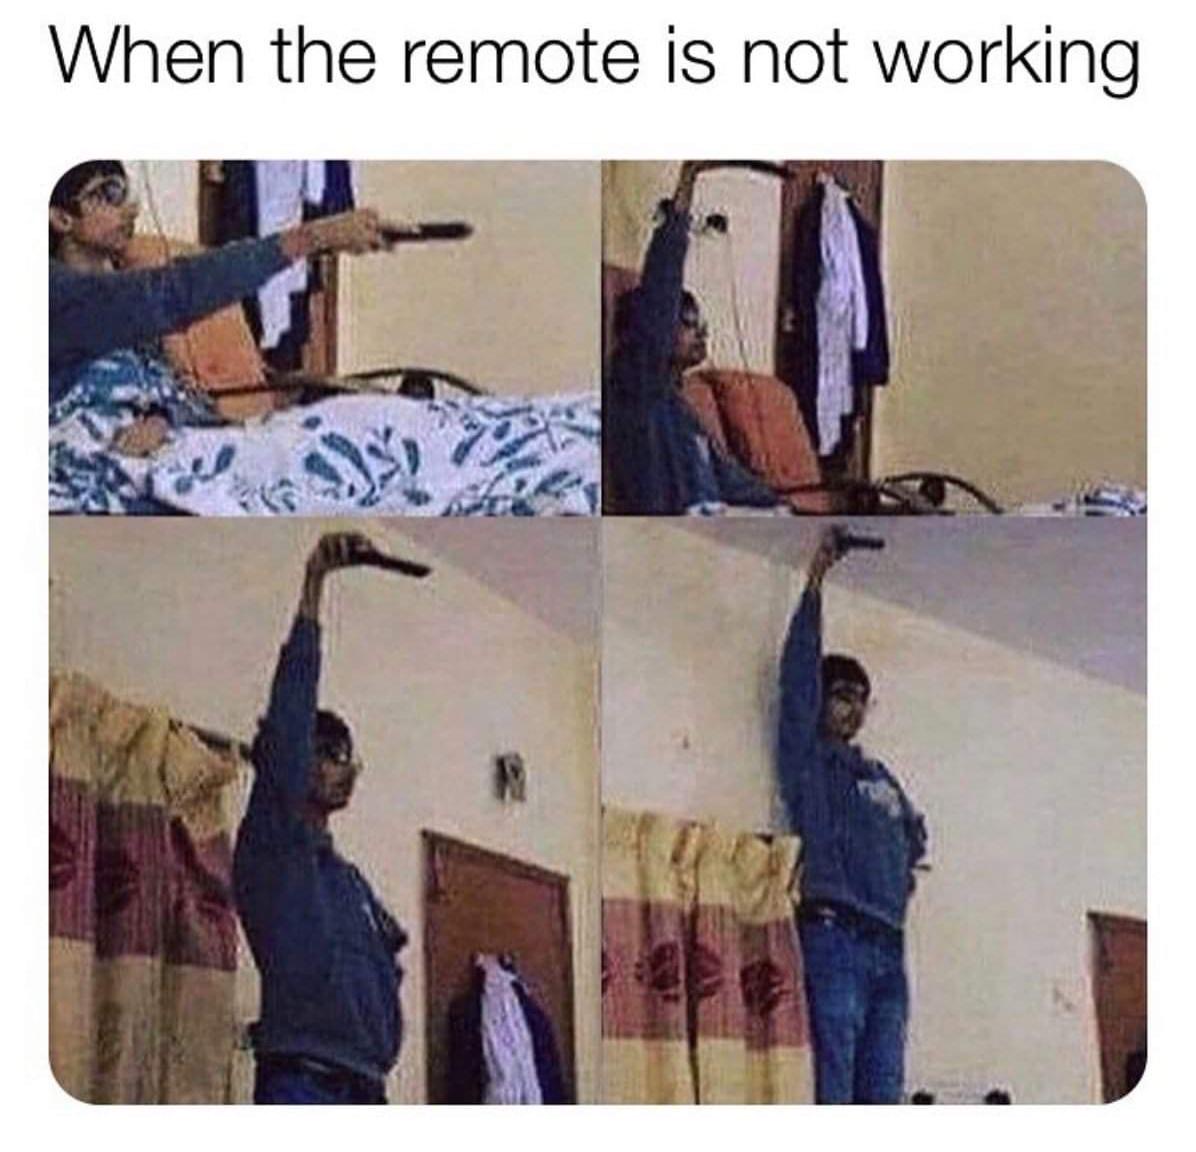 remote is not working meme - When the remote is not working